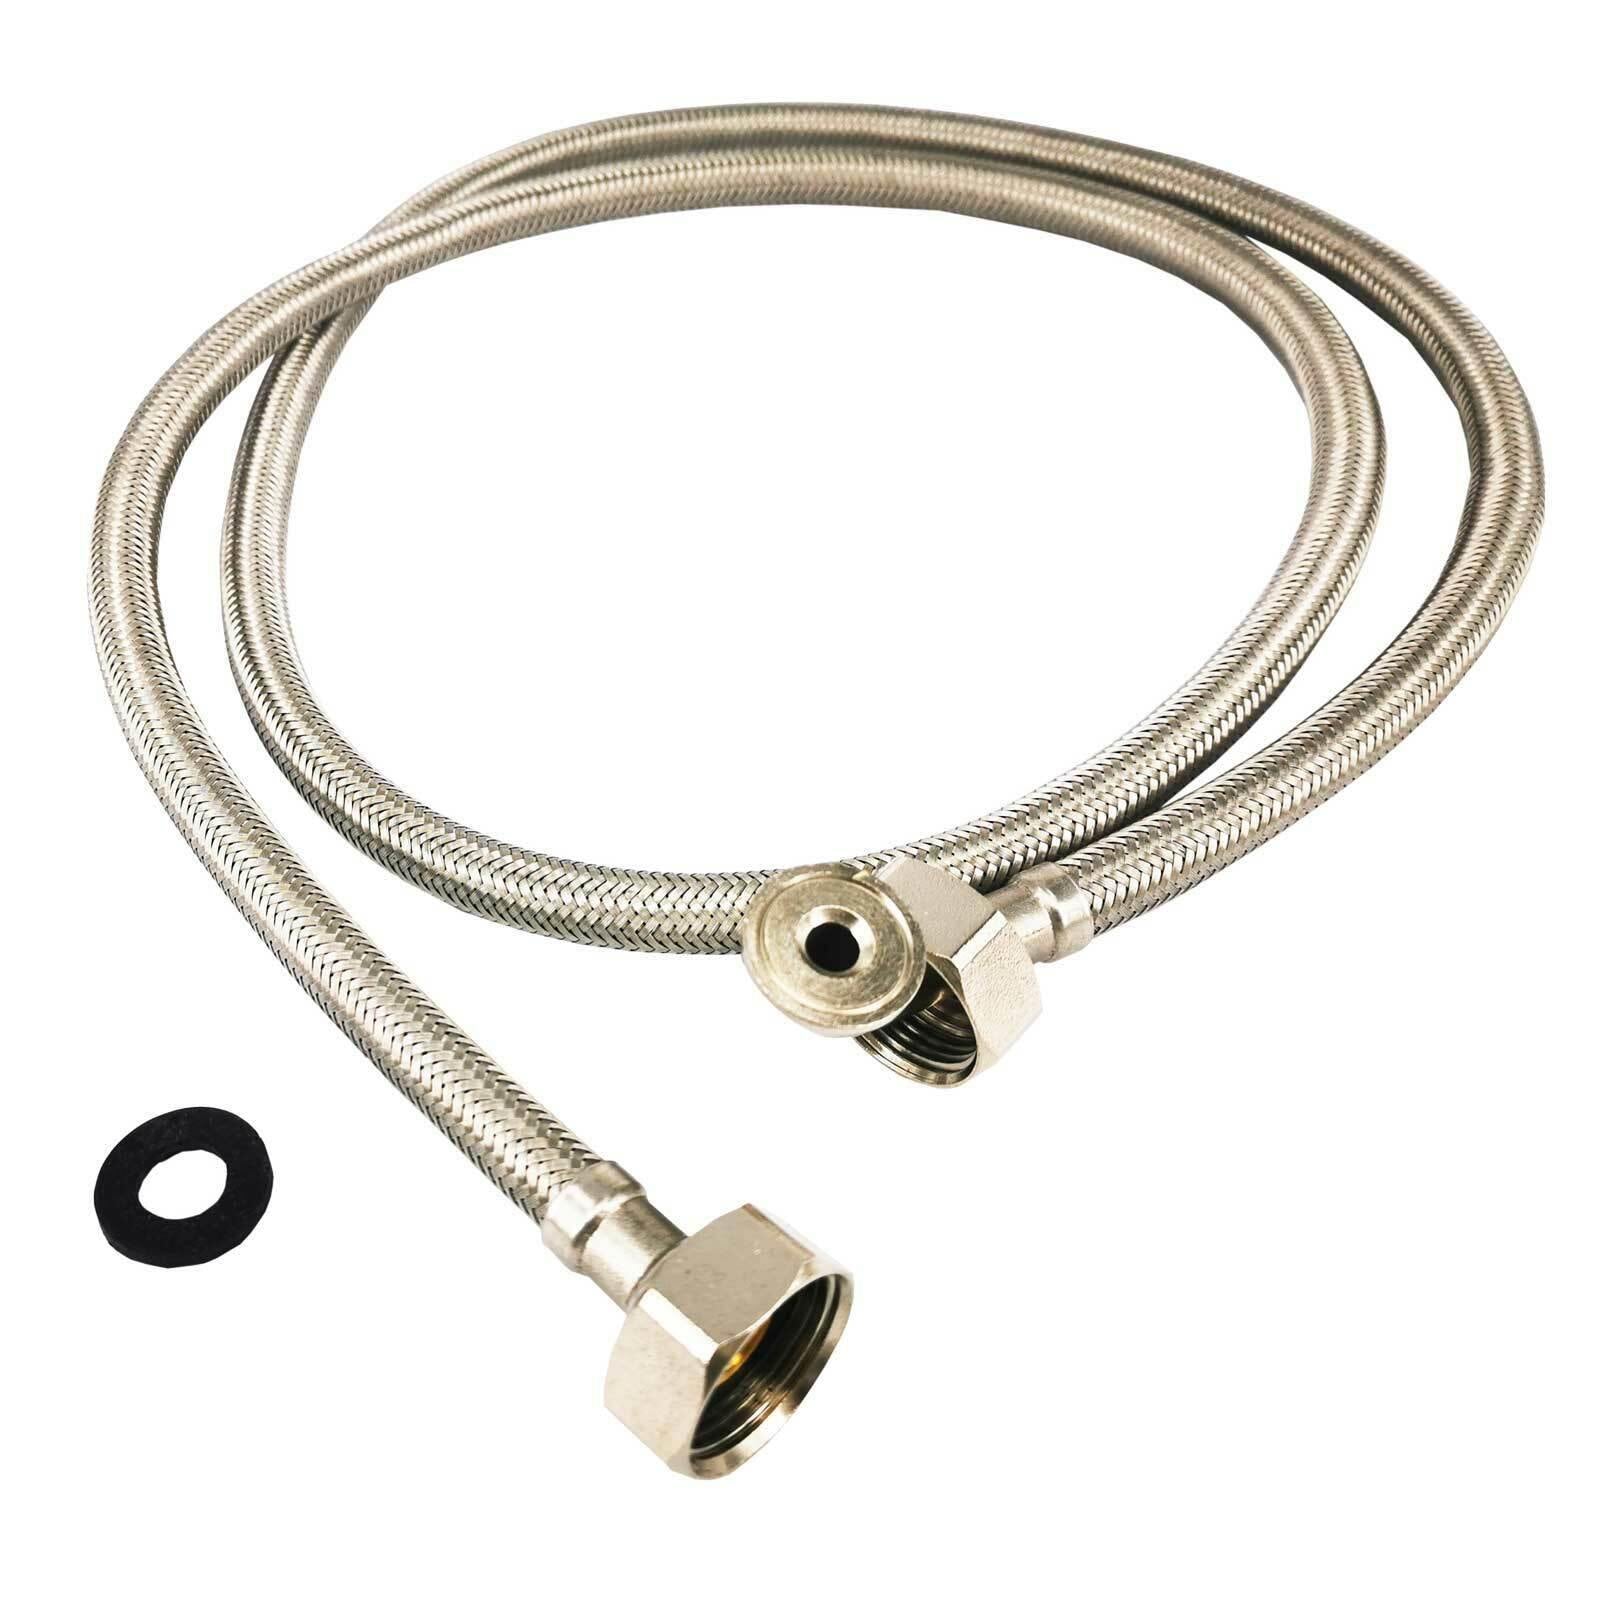 Washing Machine Hot/Cold Inlet Hose 2.0M For Fisher & Paykel WH8560J1 WH8560J3 Sparesbarn